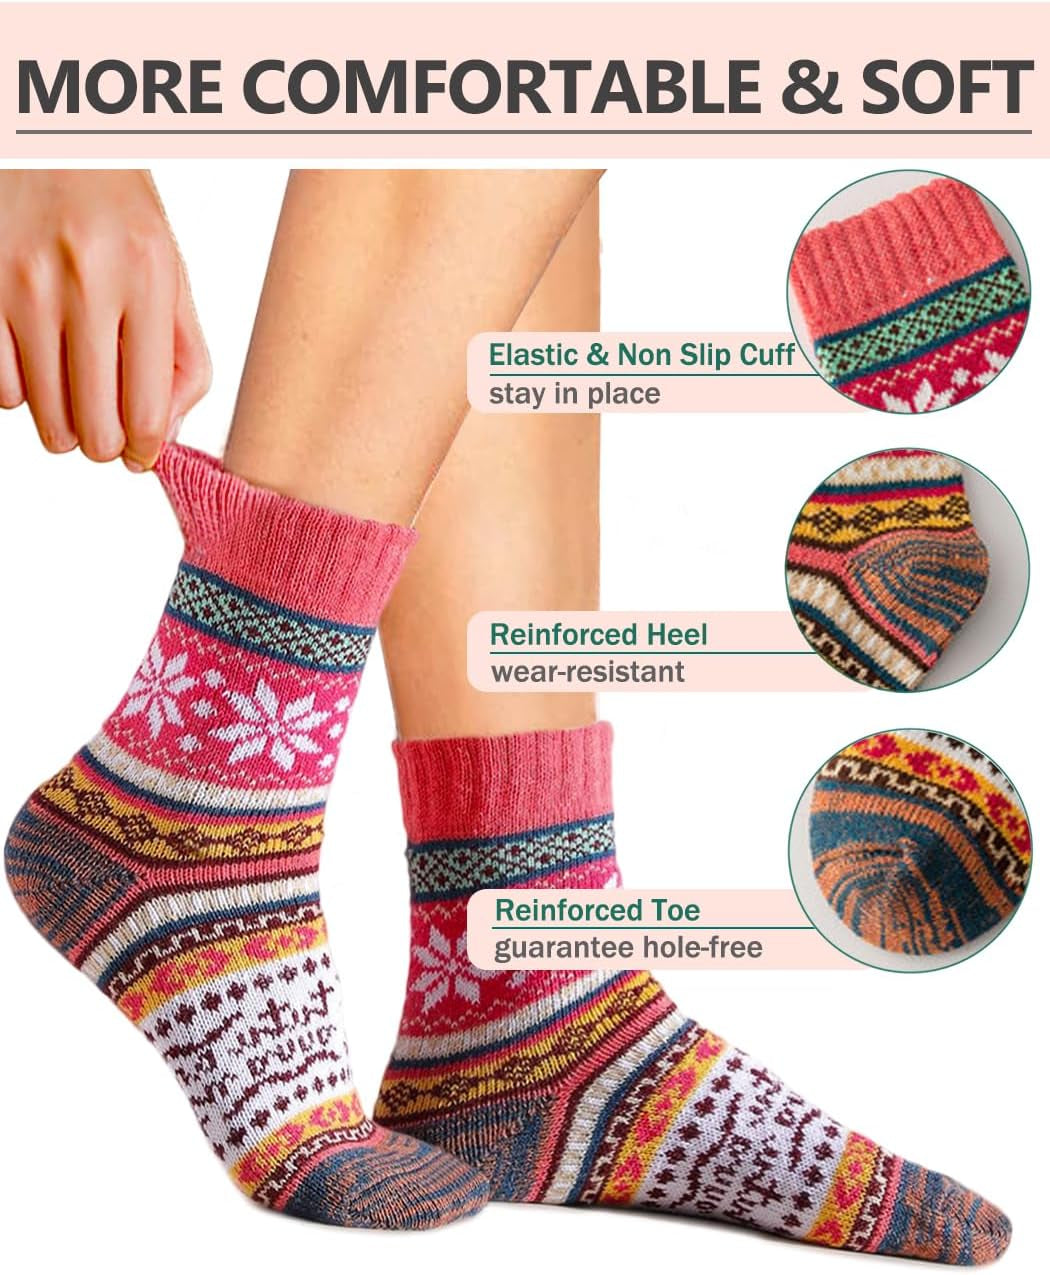 5 Pairs Womens Socks, Thermal Socks for Women, Thick Wool Winter Warm Knitting Ladies Bed Socks, Christmas Gifts for Women